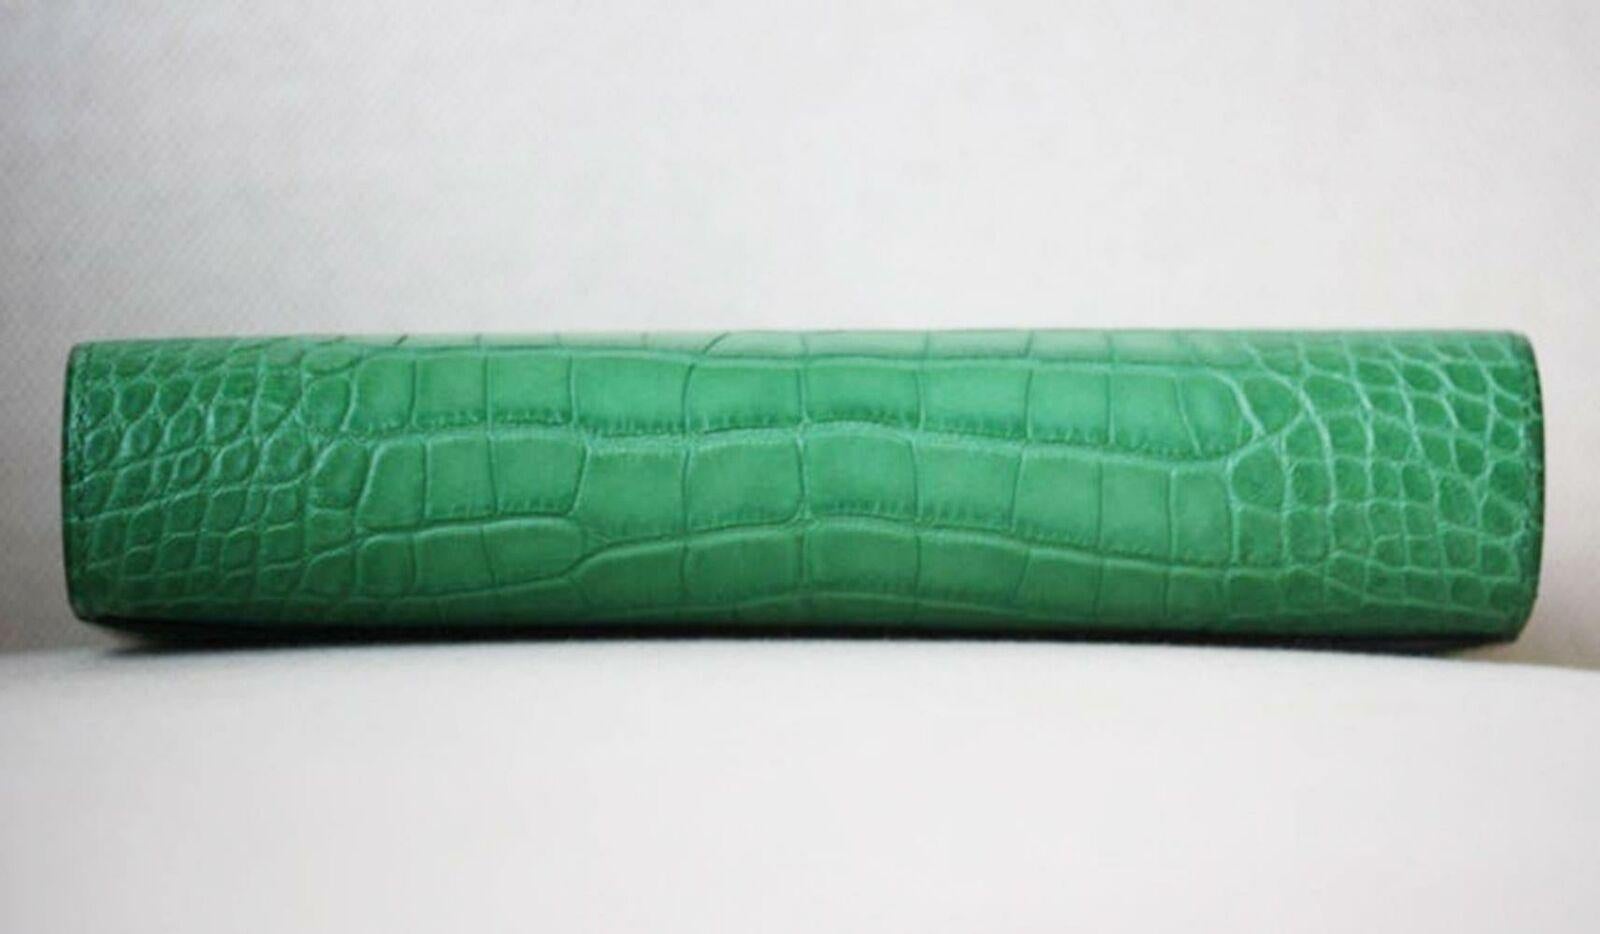 Long wallet in matte patina alligator in light green with 12 credit card slots, 2 bill pockets, zipped change purse, external pocket and palladium ’H’ tab closure.
Some protective plastic still attached.
Comes with dustbag and comes.
Dimensions: L